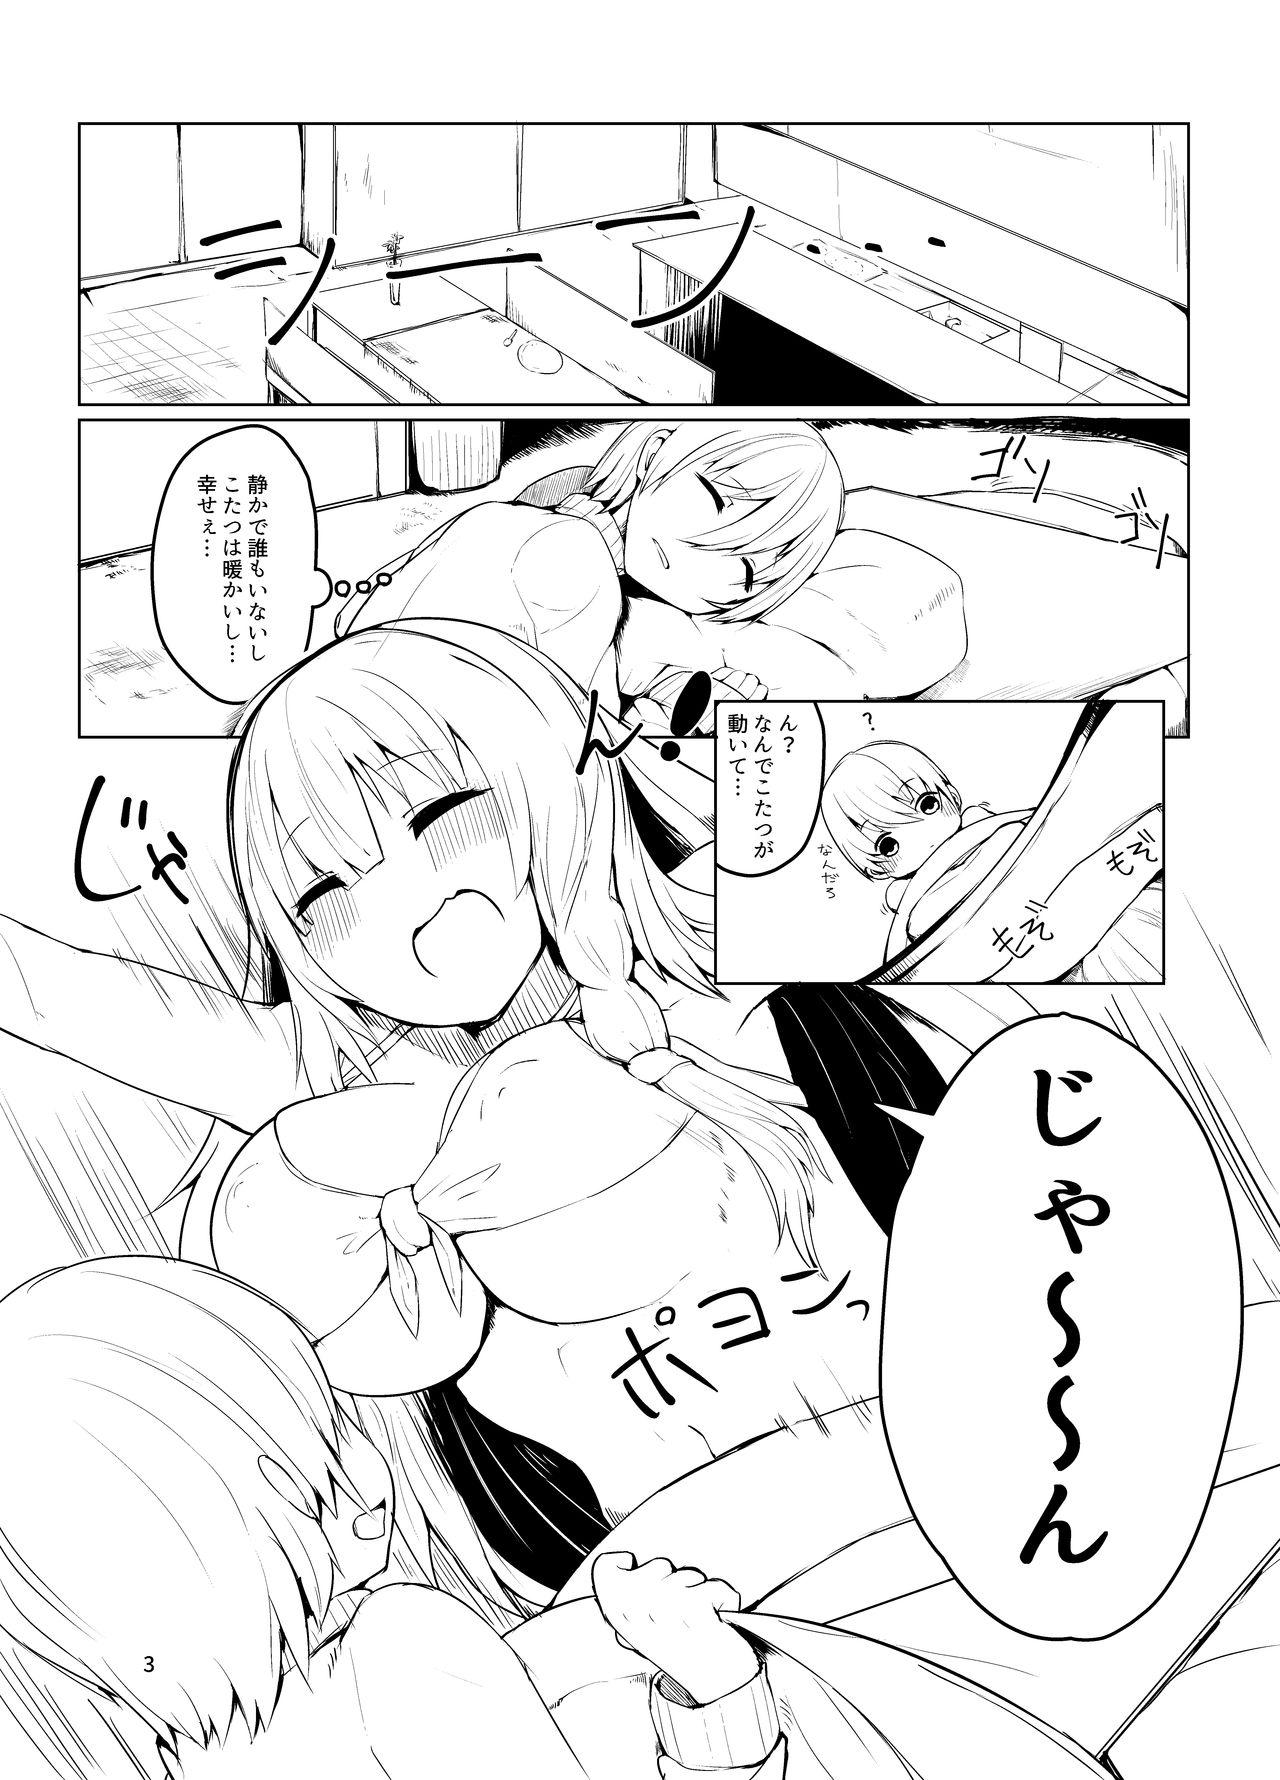 Tight Pussy Onee-san to Ofurox - Original Reverse - Page 3